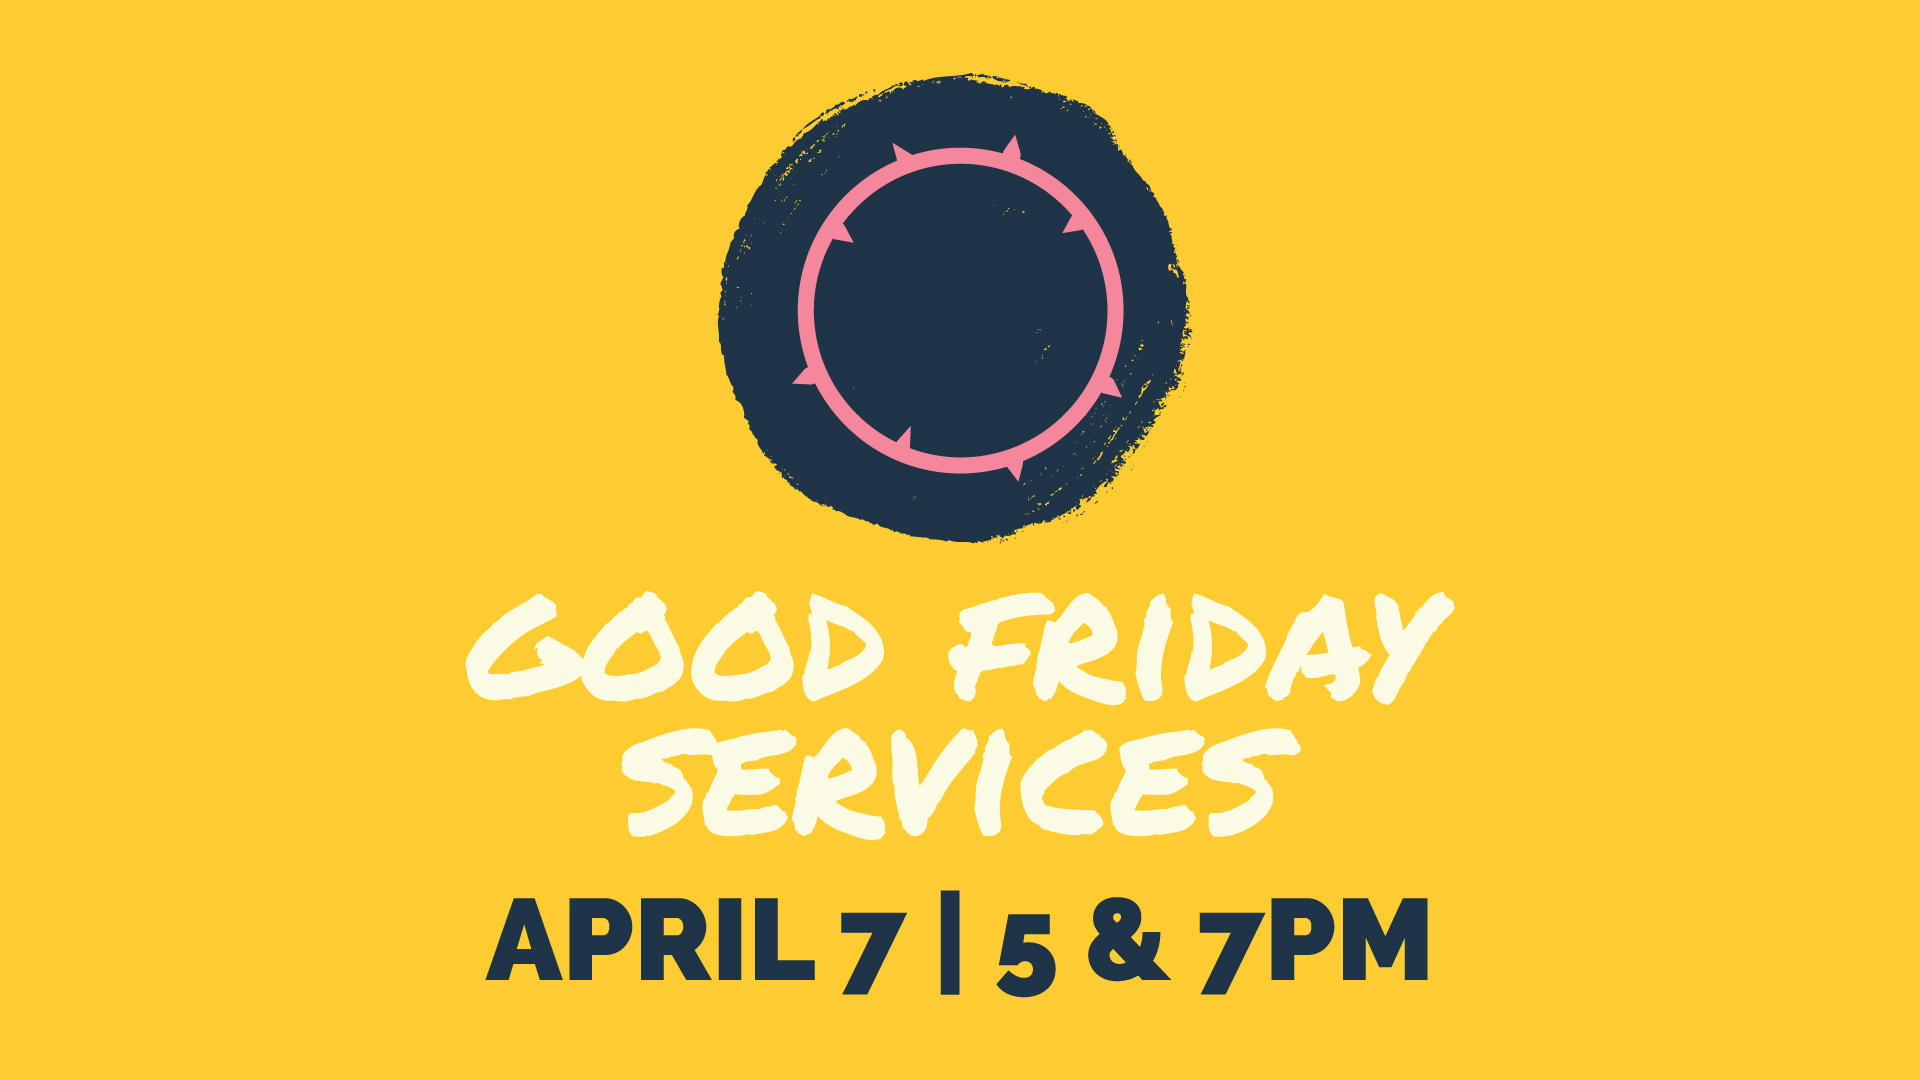 Good Friday Services | April 7 at 5PM & 7PM